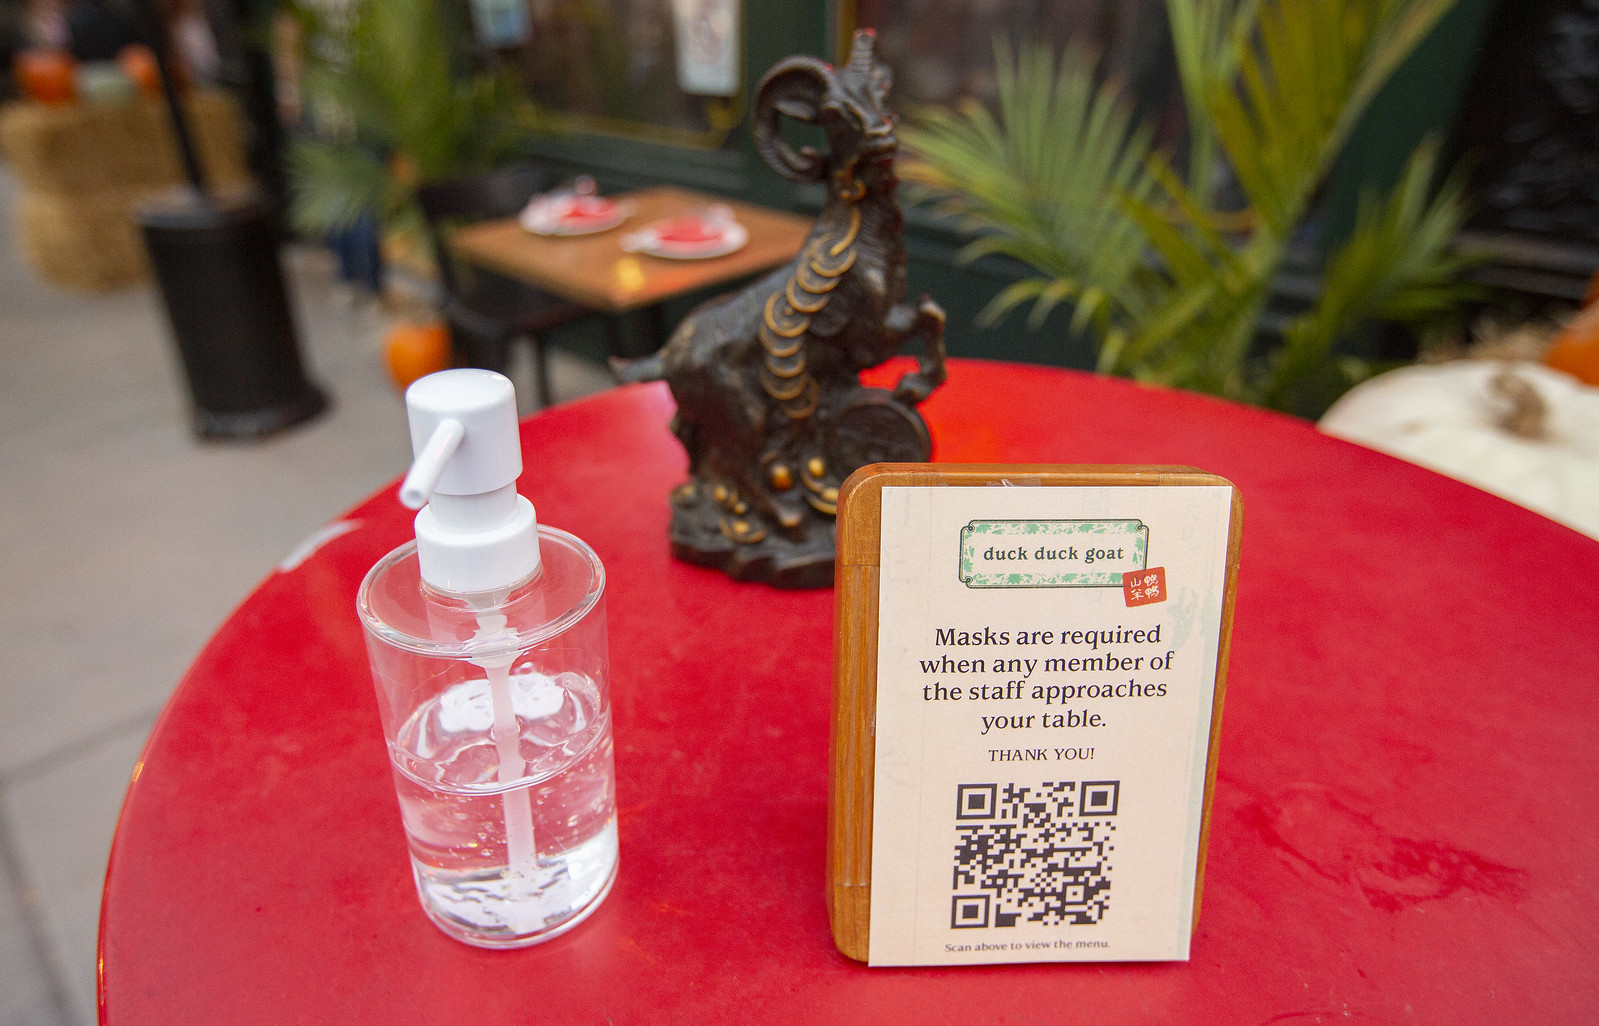 A red table with hand sanitizer and QR code, plus a goat statue.